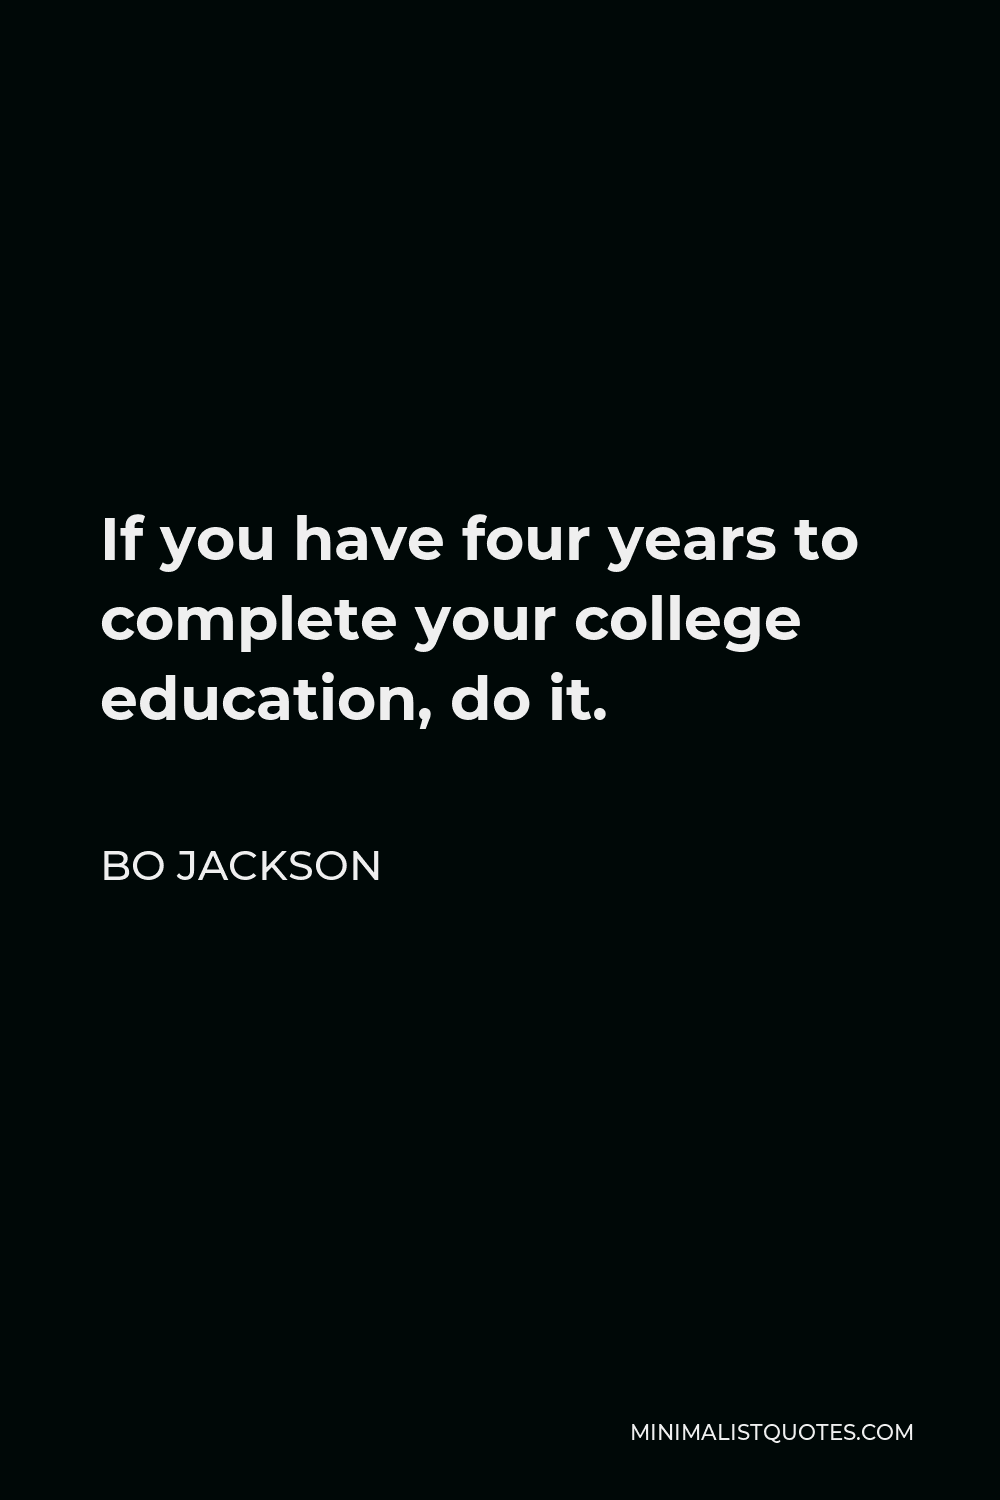 Bo Jackson Quote - If you have four years to complete your college education, do it.